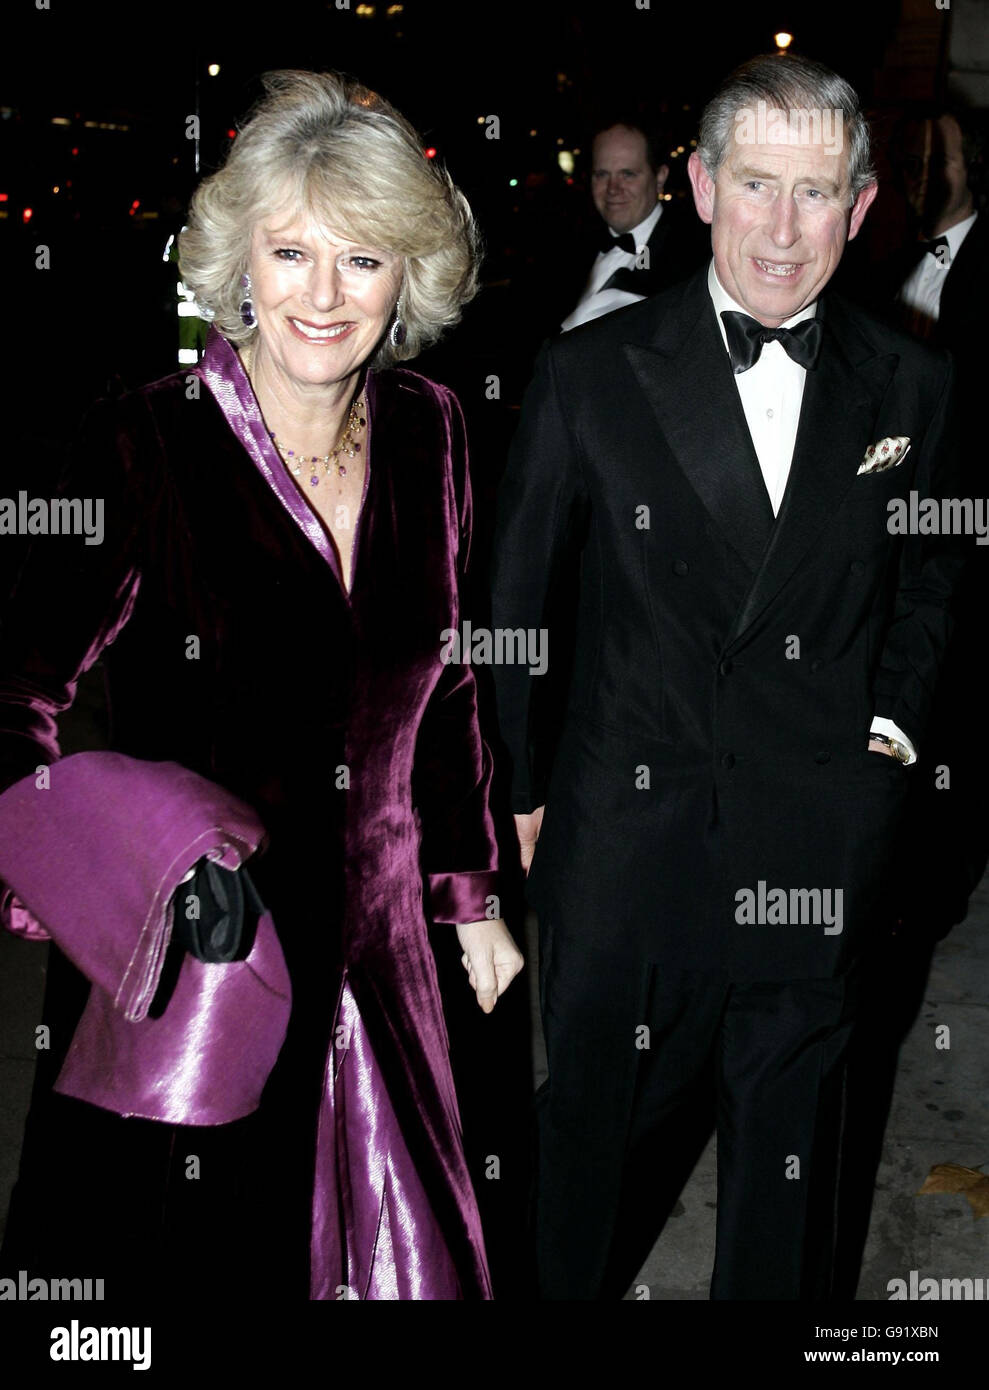 The Prince of Wales and the Duchess of Cornwall arrive at the Banqueting House in central London, Wednesday 23 November 2005 for a Gala Evening to celebrate the work of The Prince's Trust. See PA Story ROYAL Charles. PRESS ASSOCIATION Photo. Photo credit should read: Andrew Parsons/PA Stock Photo